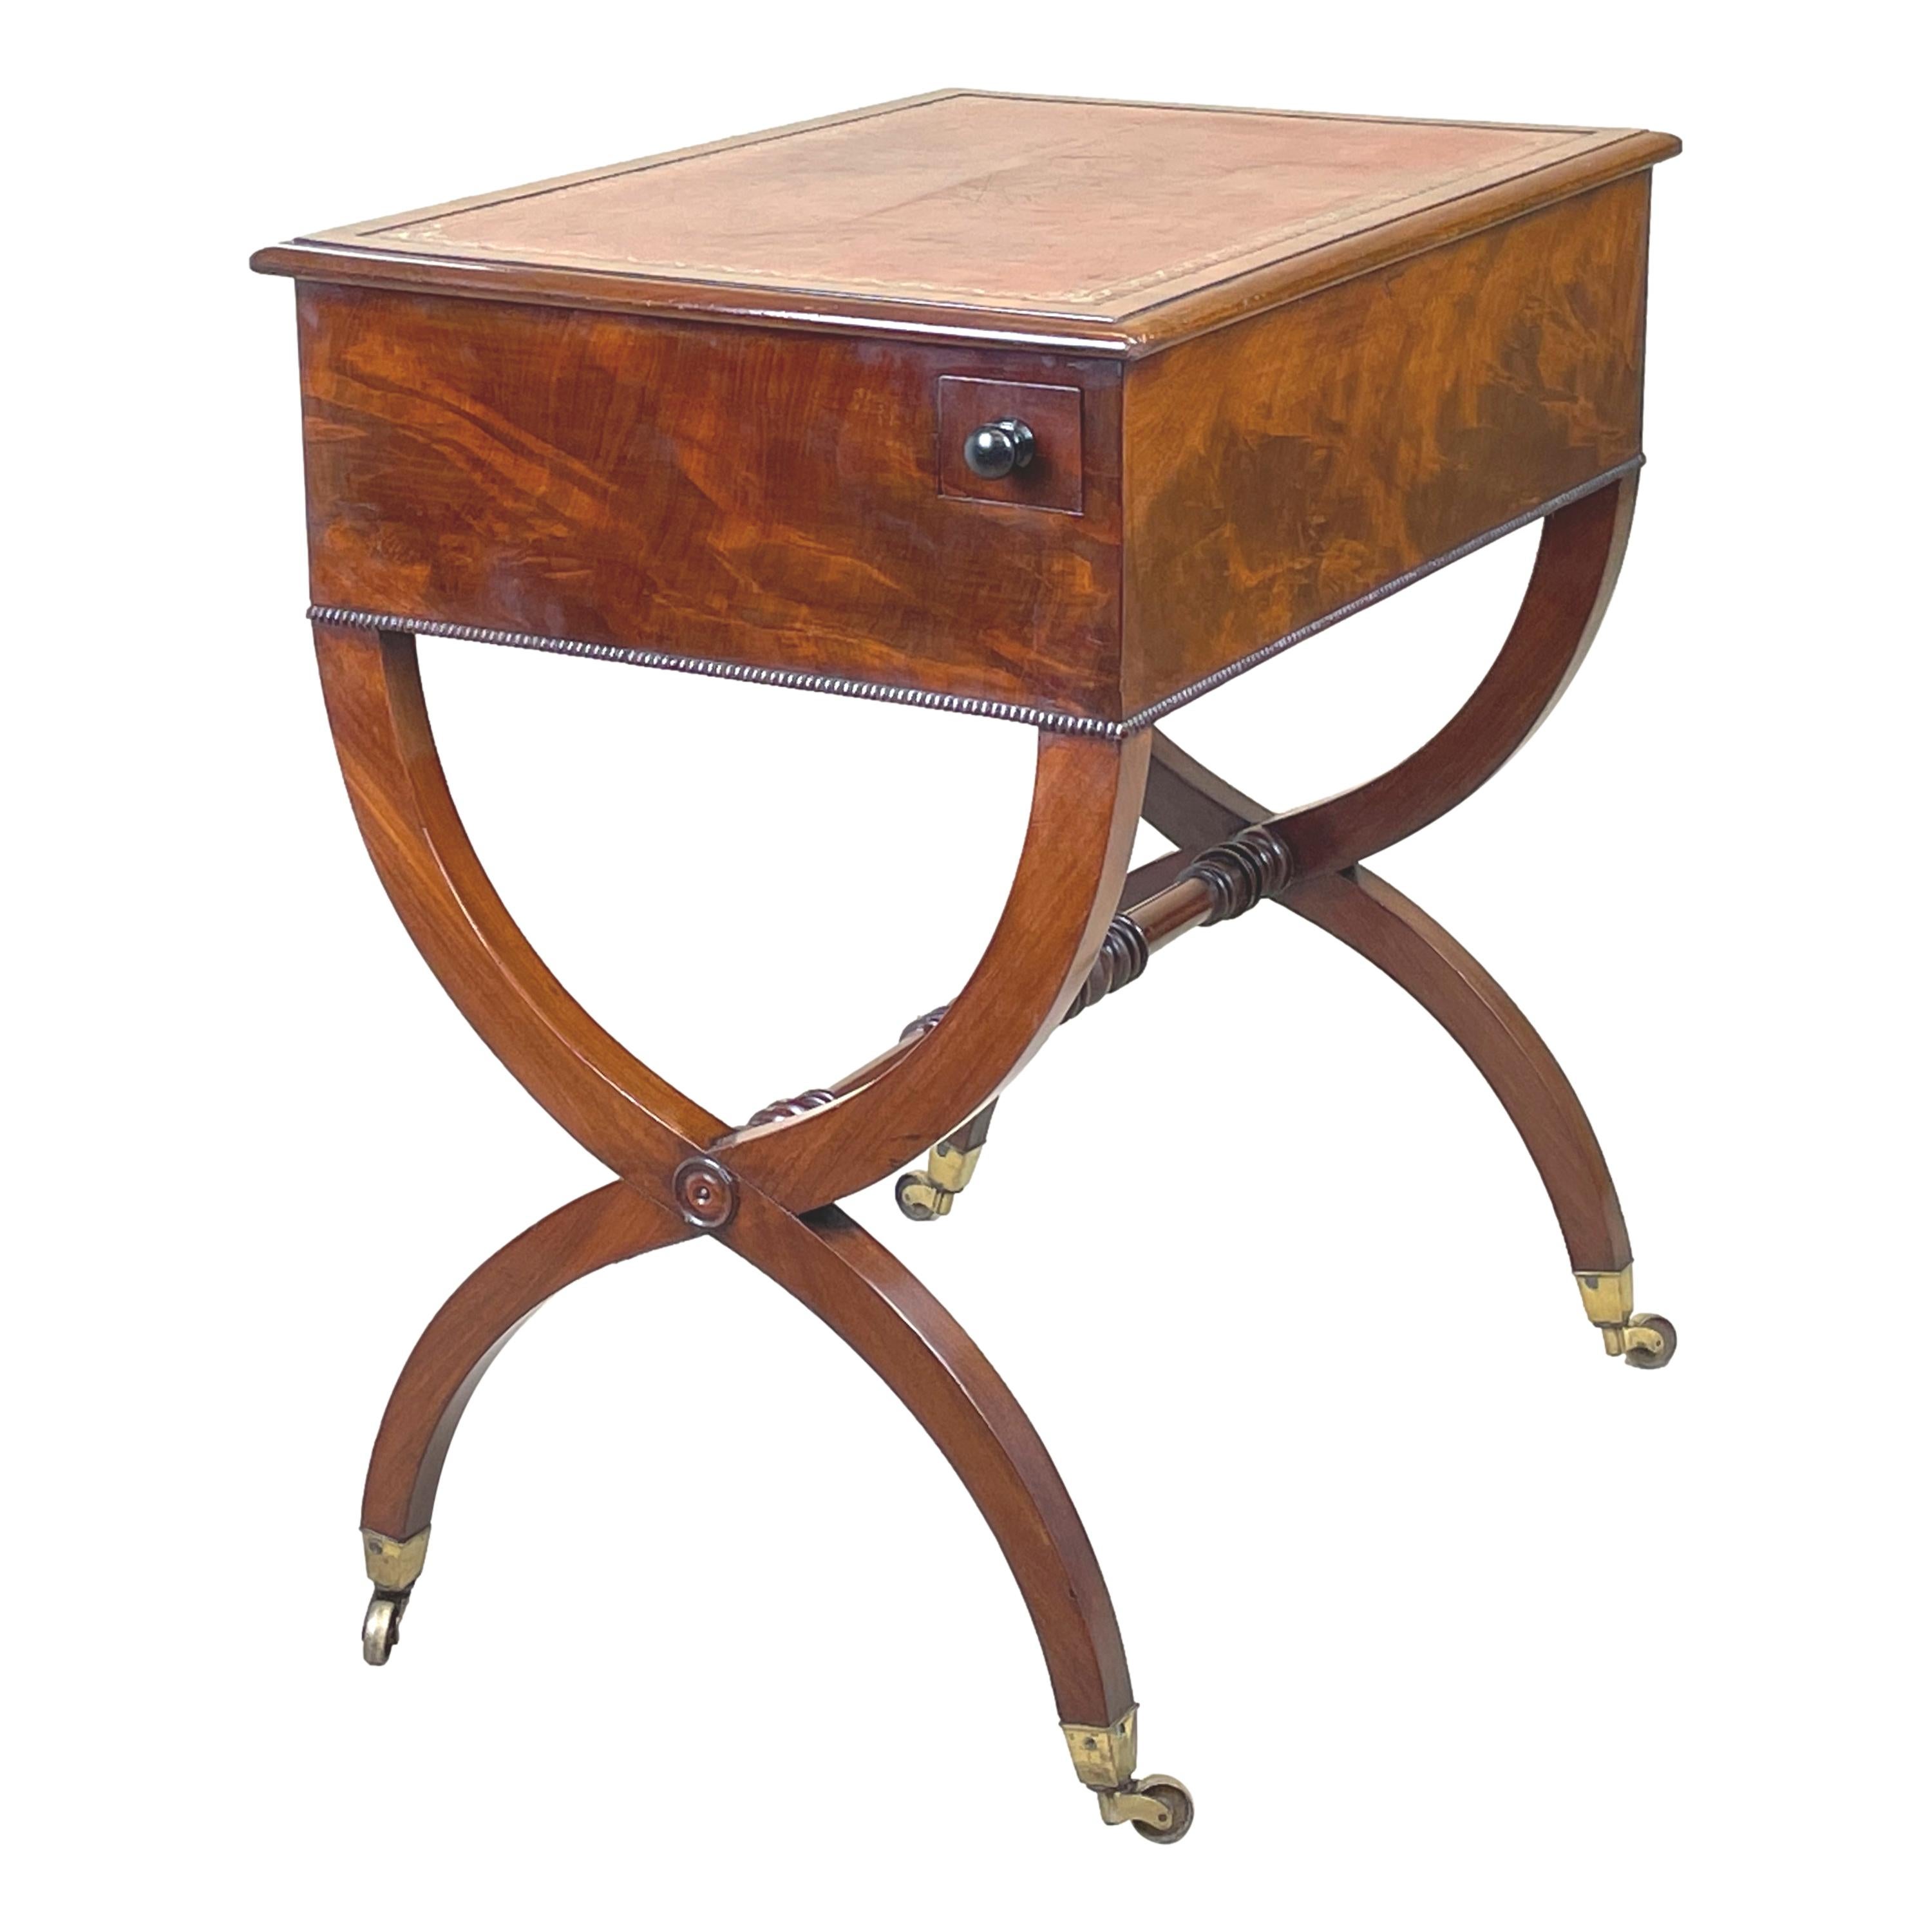 A fine quality regency period mahogany writing table
Having two fitted drawers to frieze with original
Turned knobs raised on elegant x framed end
Supports with original brass castors

(This charming little writing table oozes elegance
and class and